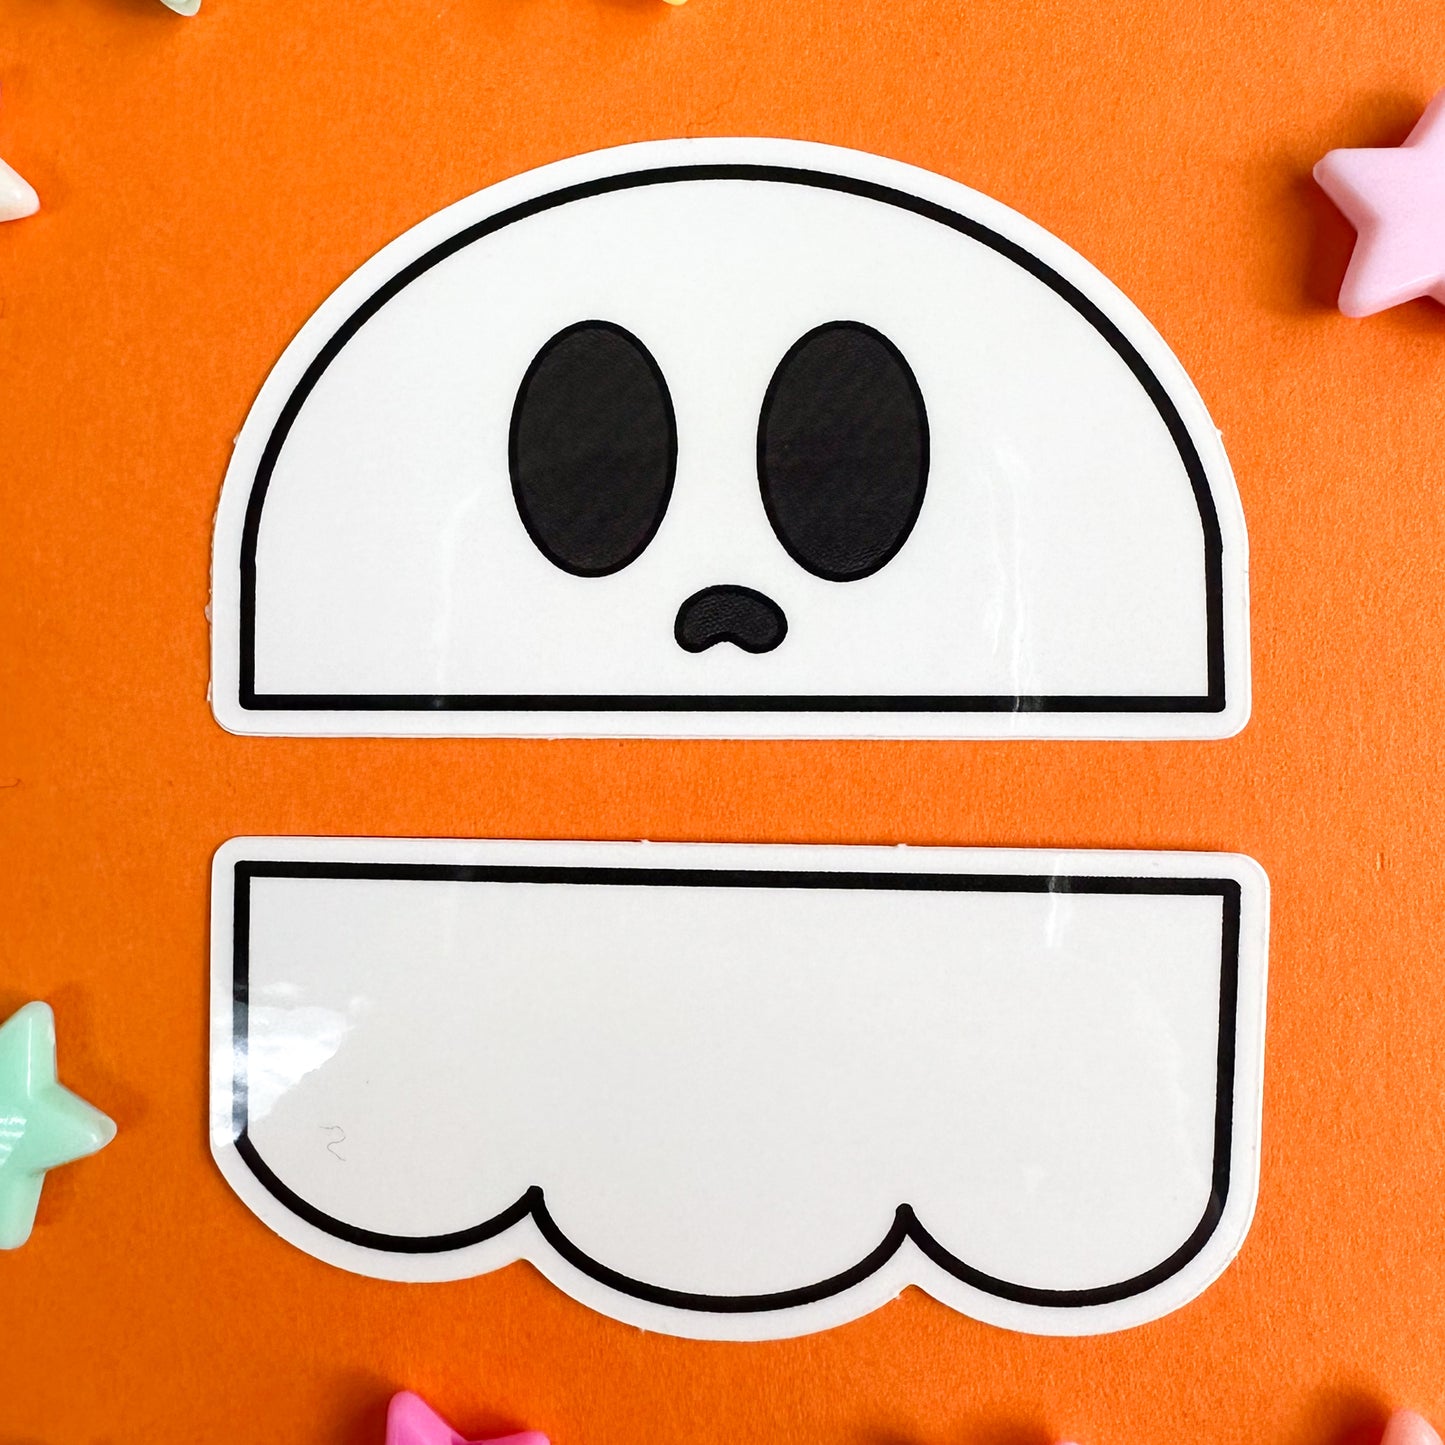 A sticker set of a ghost that has been cut in half horizontally, the top half is the head and the bottom part is the swoop bottom. The stickers are on an orange background star beads around them. 